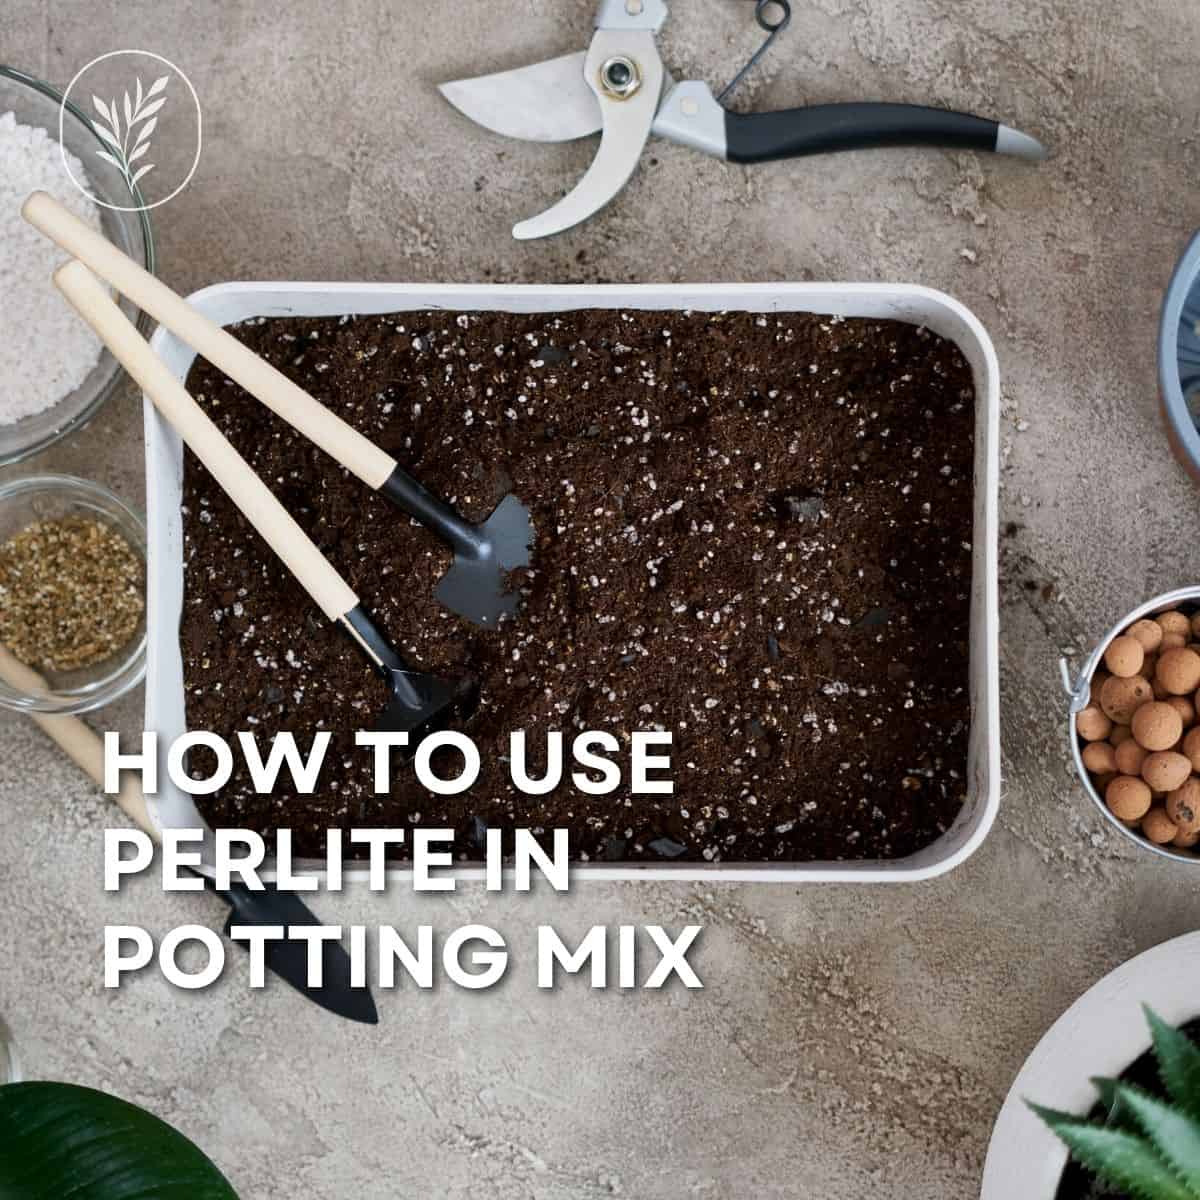 Quality potting soil is incredibly important for your container plants. There are many different pre-mixed options available, but you can often get the best mix by customizing your potting soil with perlite. Here's how to use perlite in potting mix for the best results in your garden. Via @home4theharvest